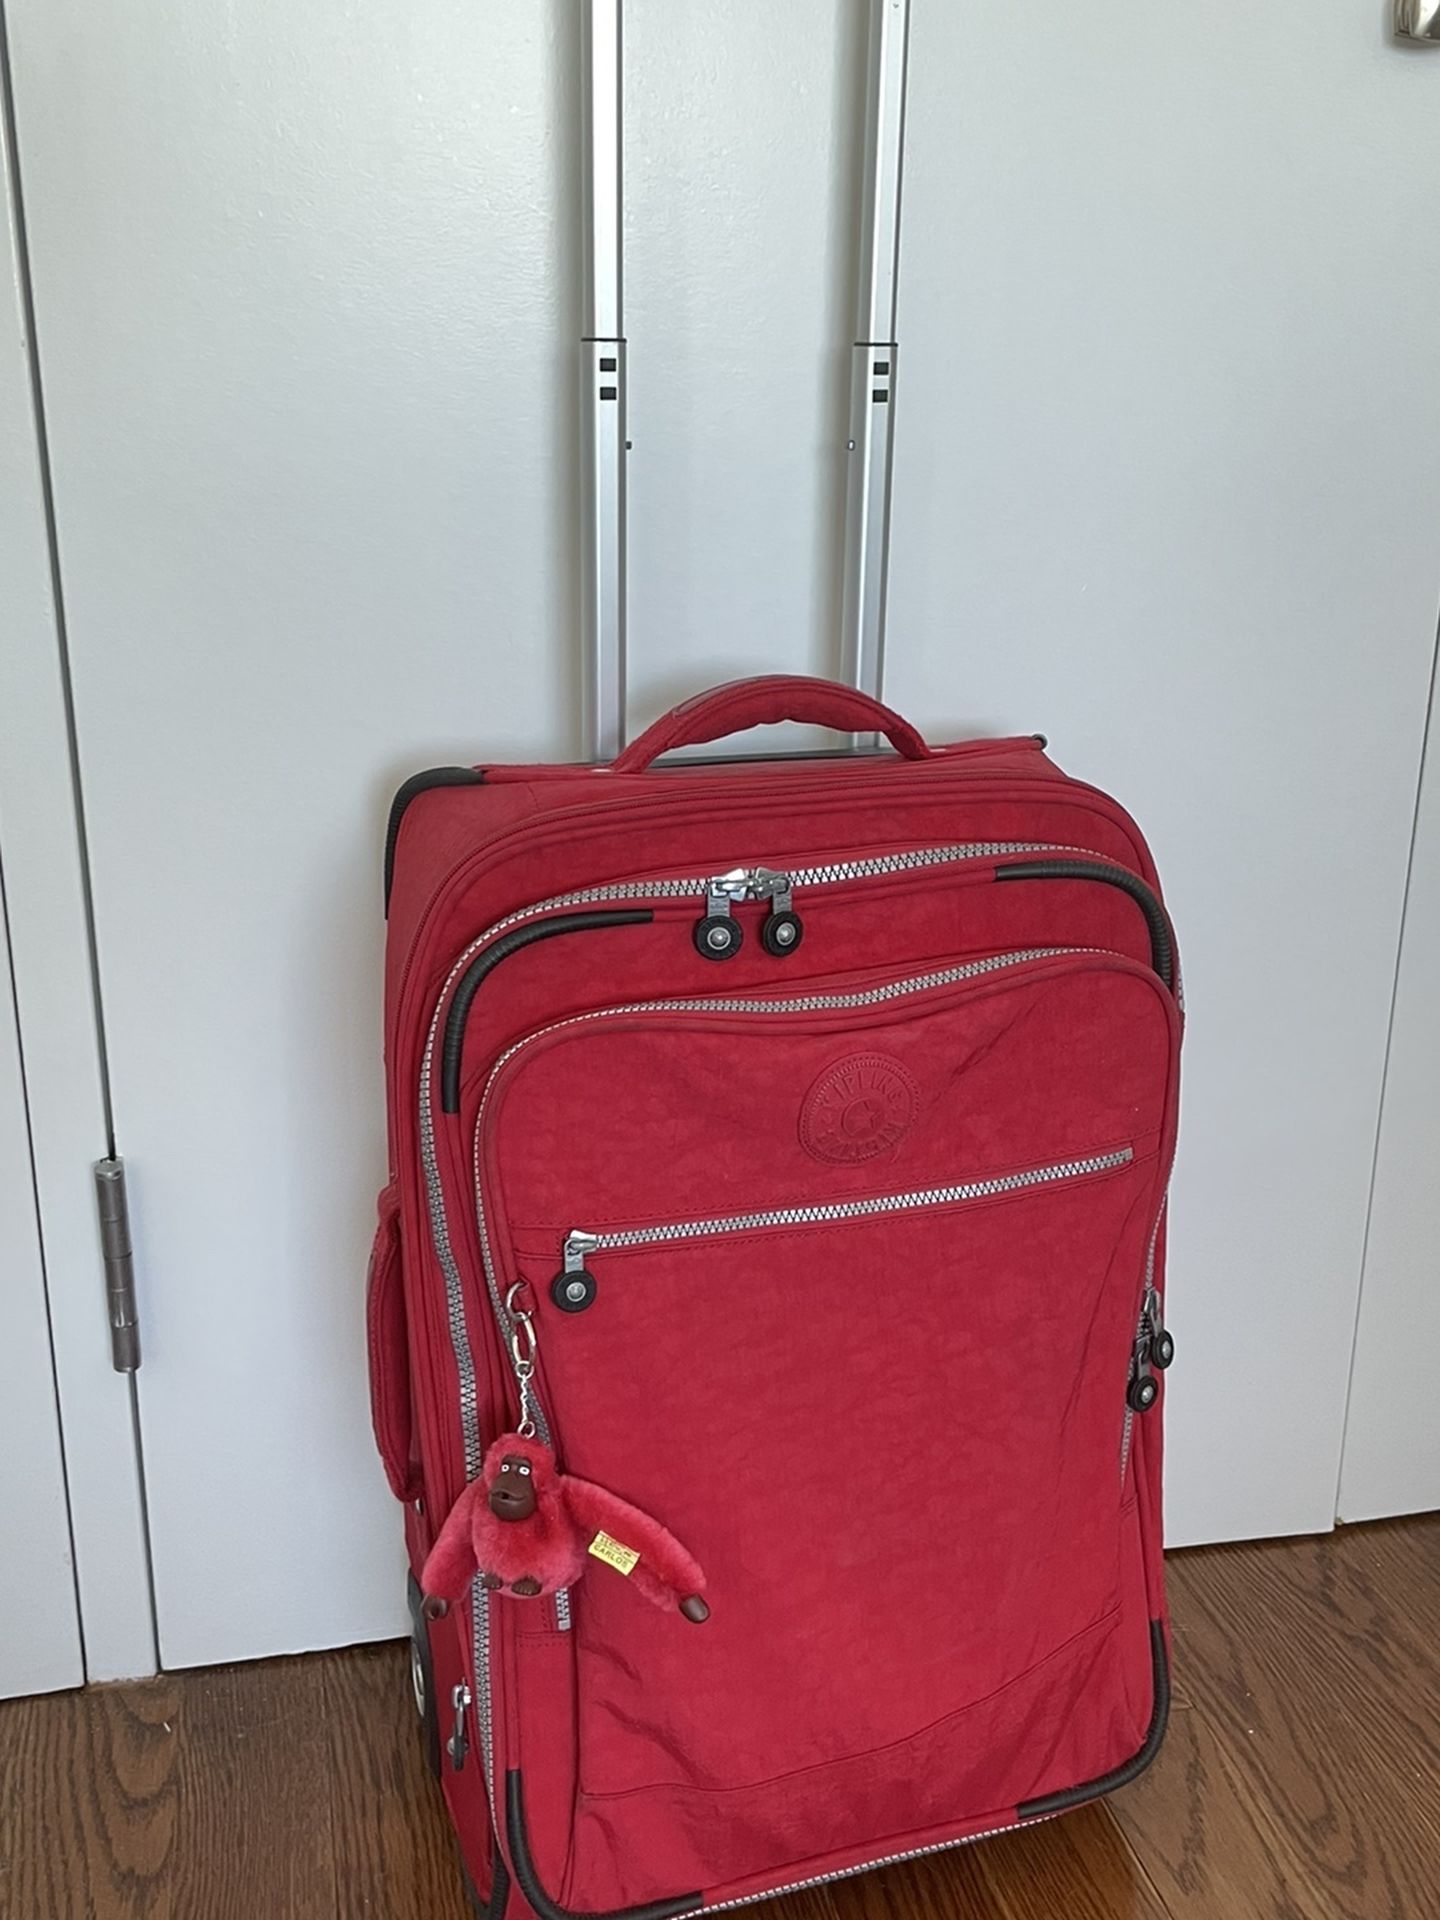 Kipling Carry-on/ Cabin Luggage Red Color